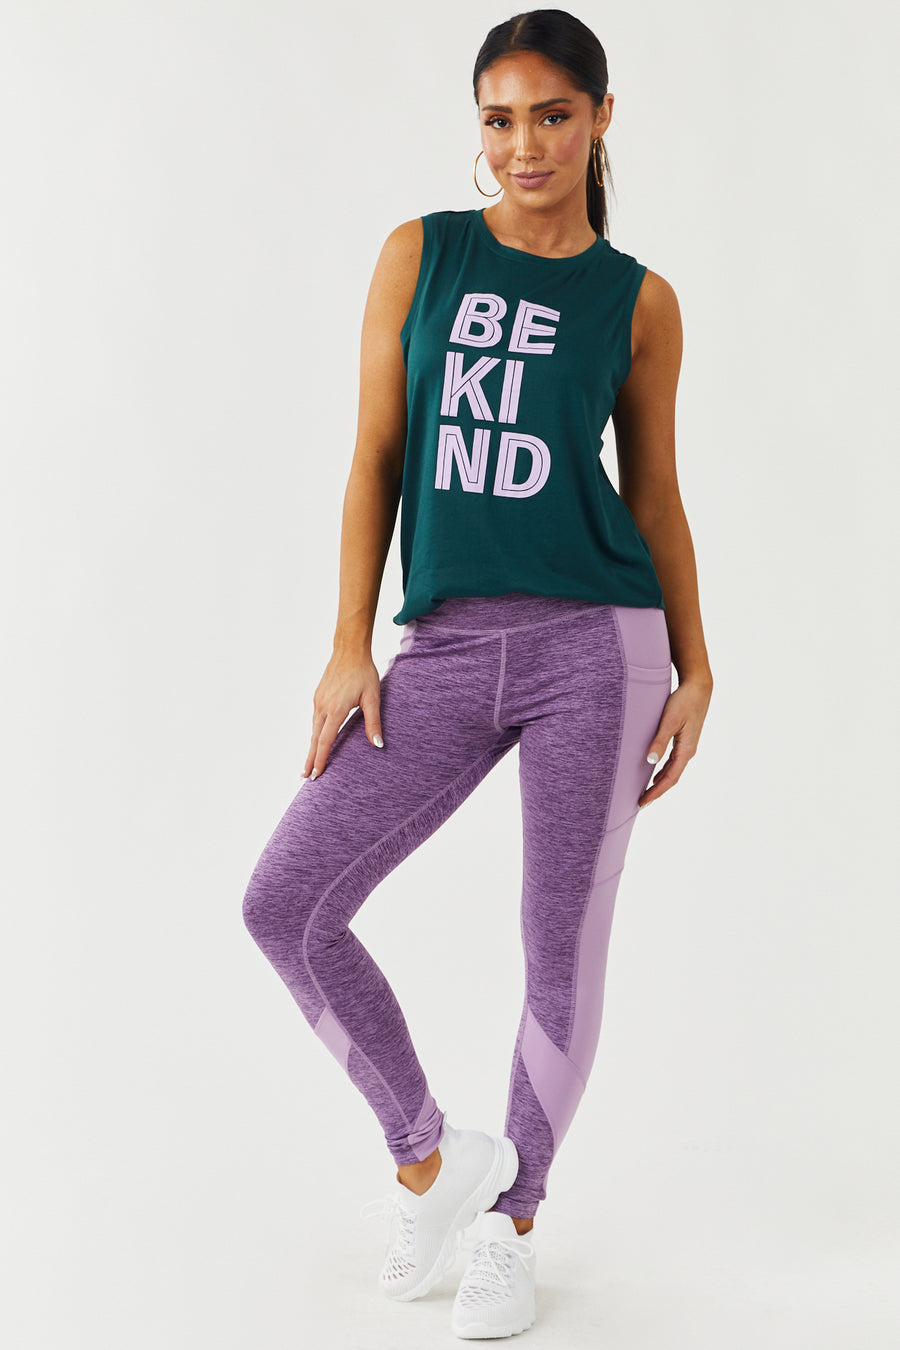 Lilac Colorblock Mid Rise Leggings with Pockets